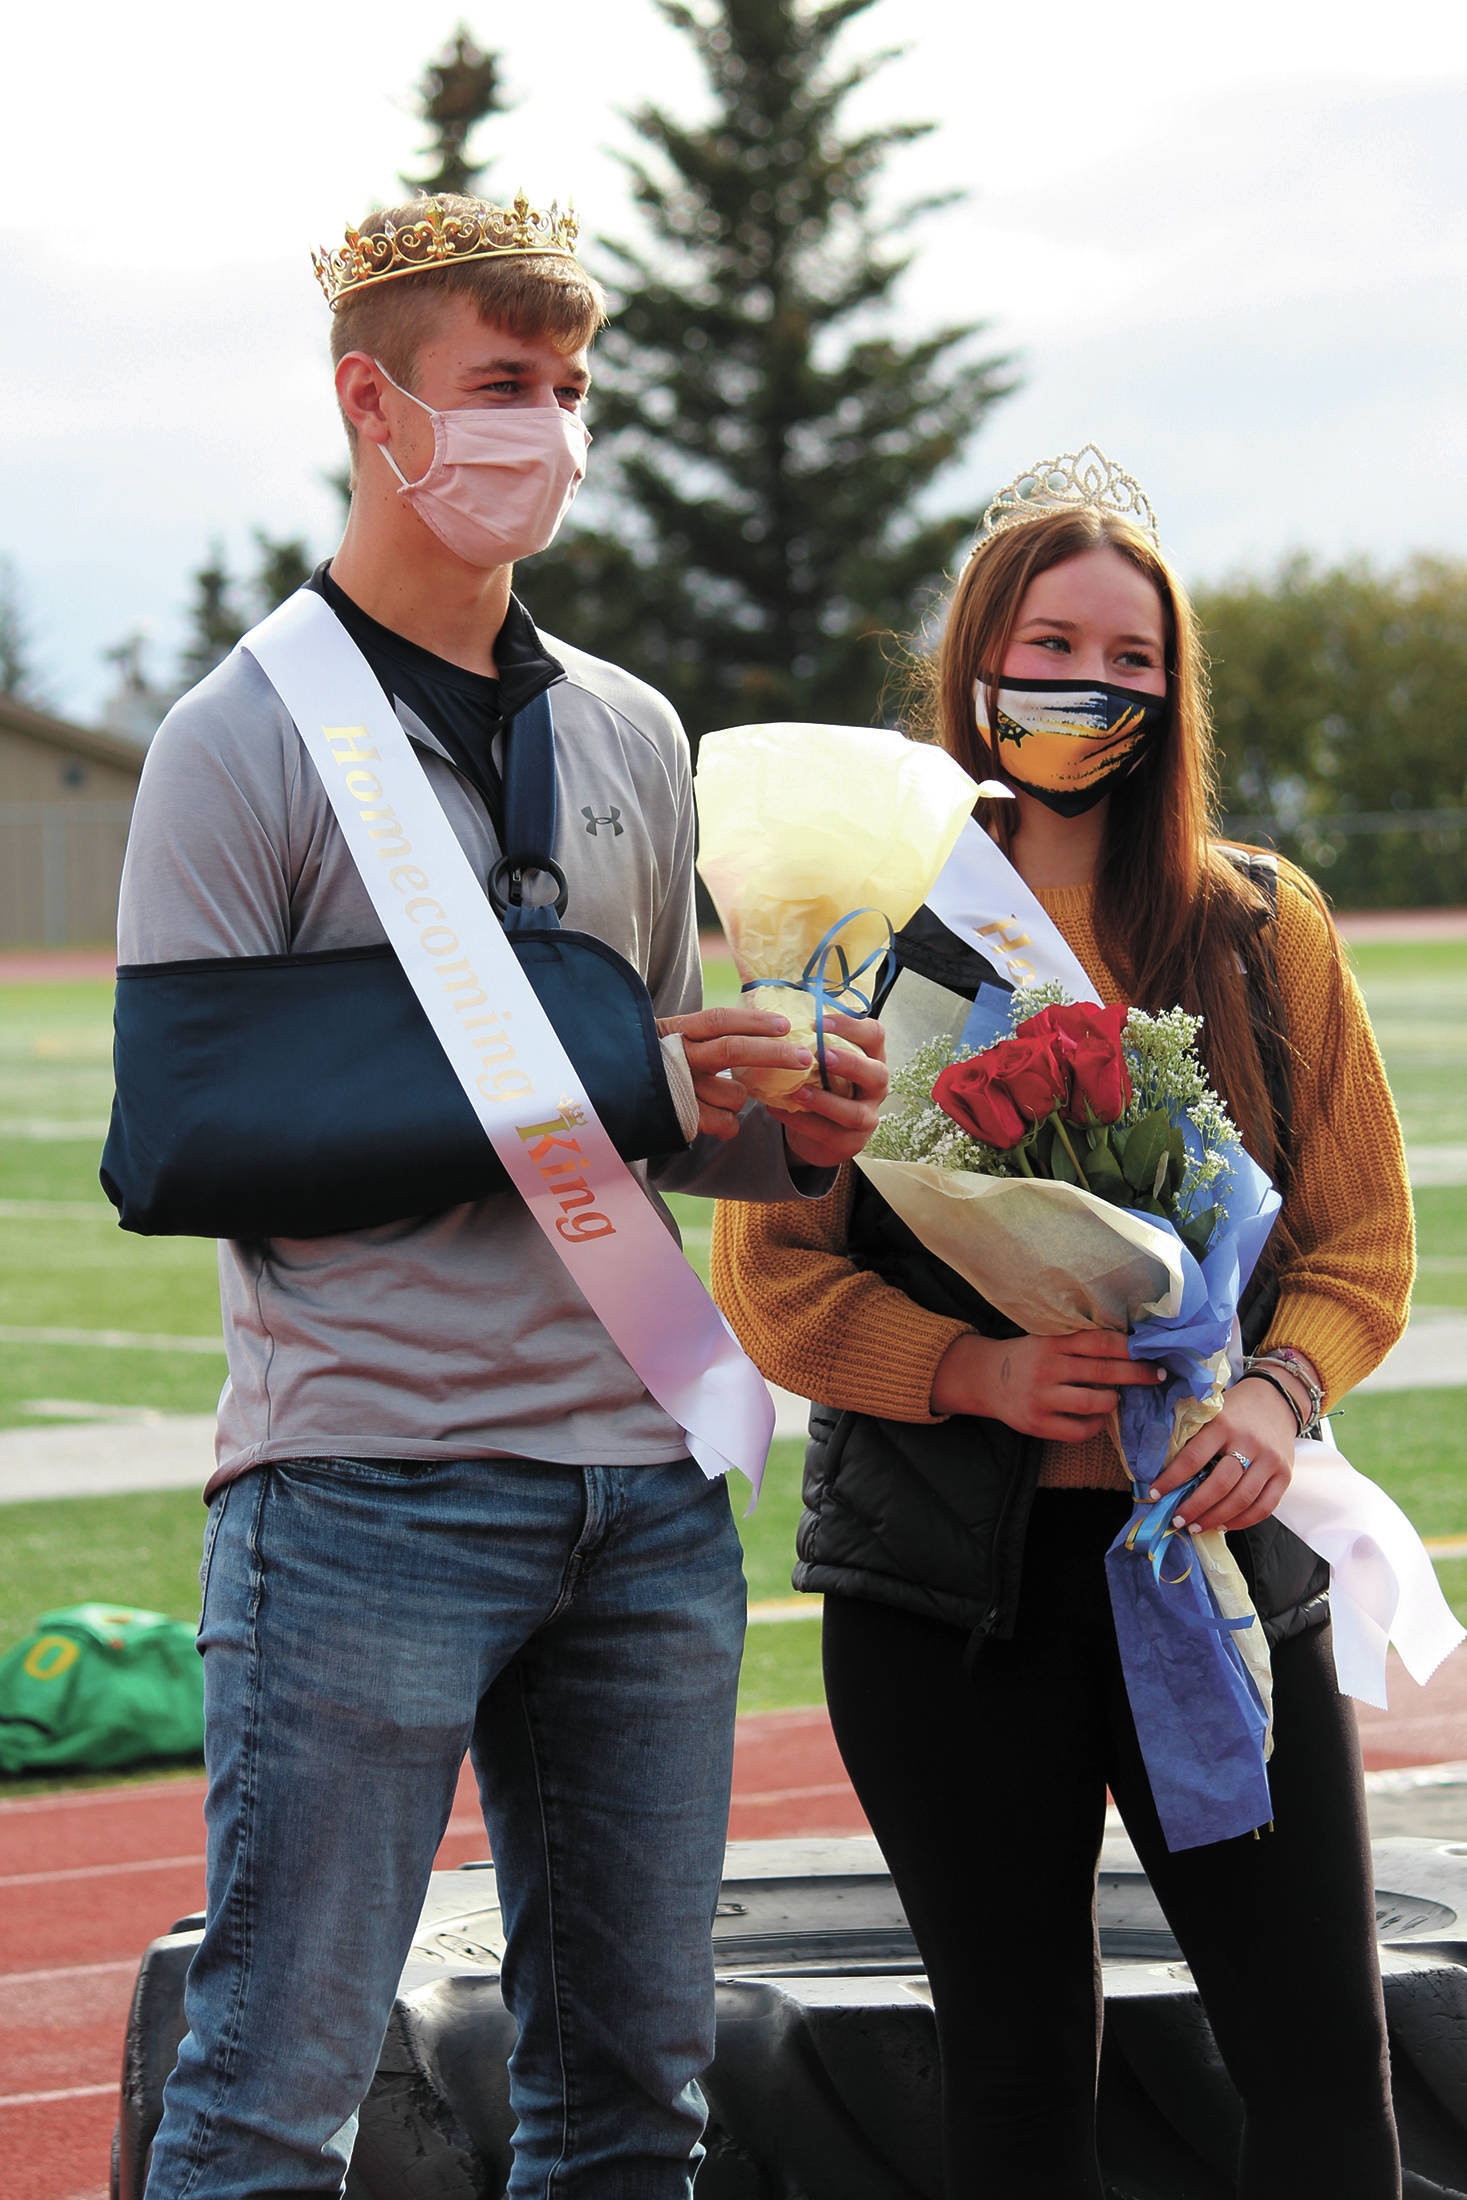 Seniors Clayton Beachy and Mary Black are crowned this year’s homecoming king and queen during halftime at Homer High School’s homecoming game Saturday, Oct. 3, 2020 in Homer, Alaska. (Photo by Megan Pacer/Homer News)